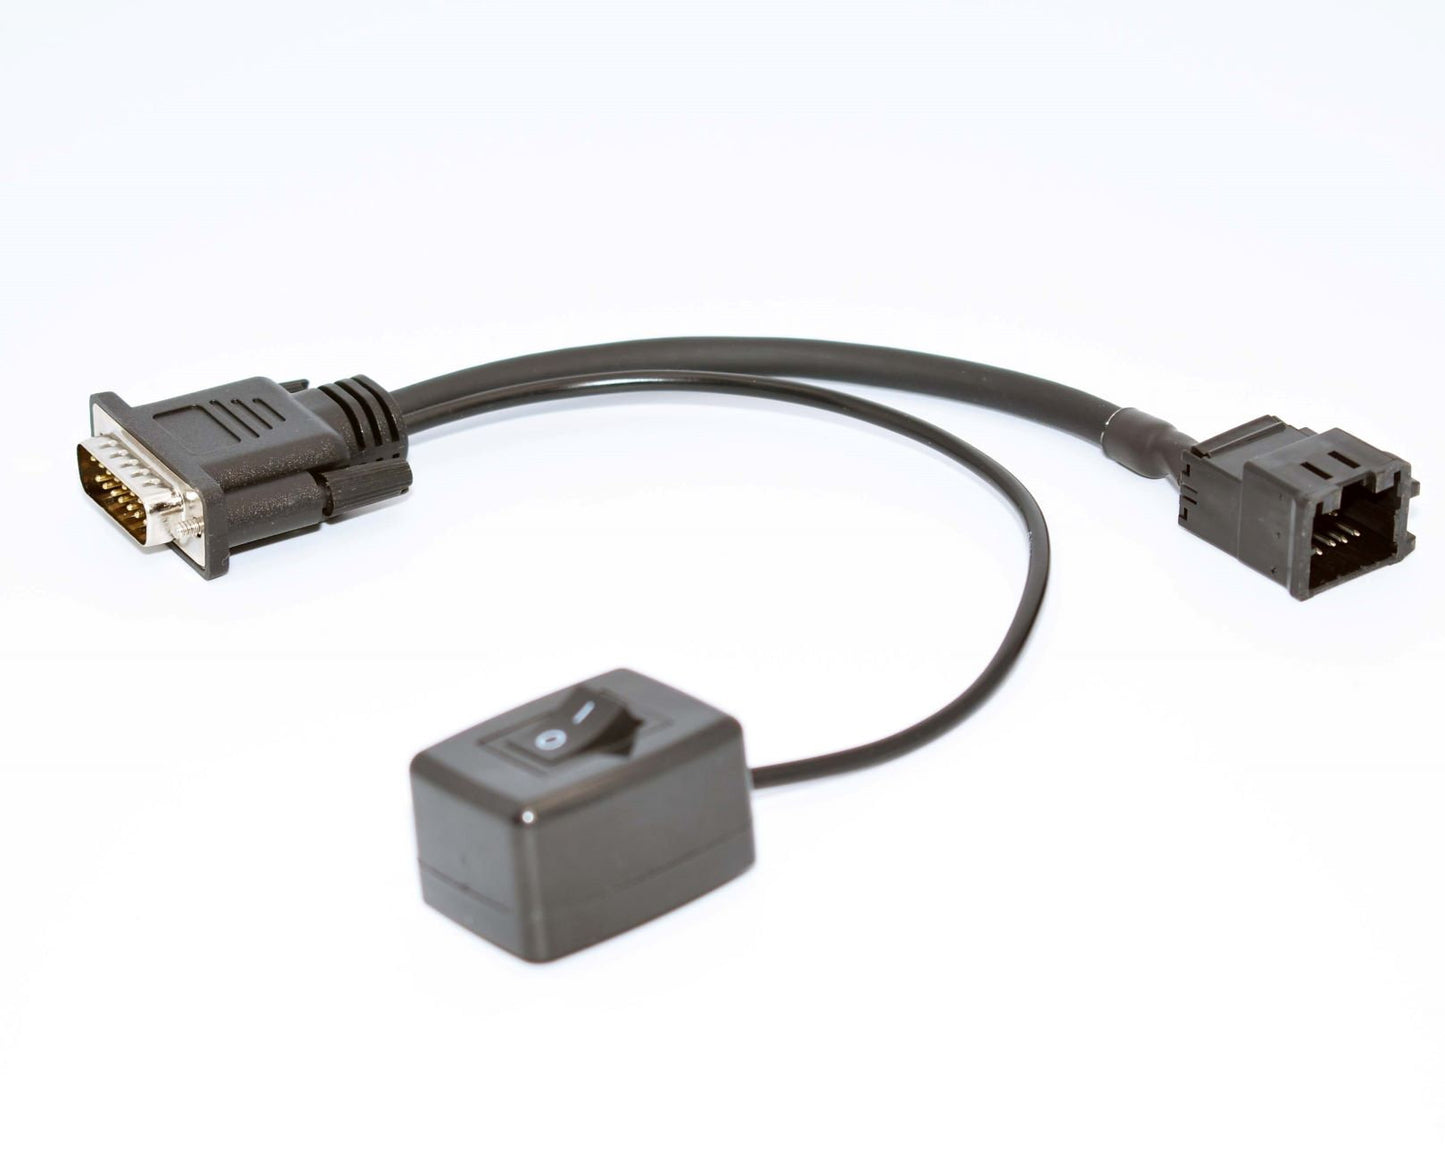 DFOX to Kess3 adapter cable, remapping, chiptuning adapter